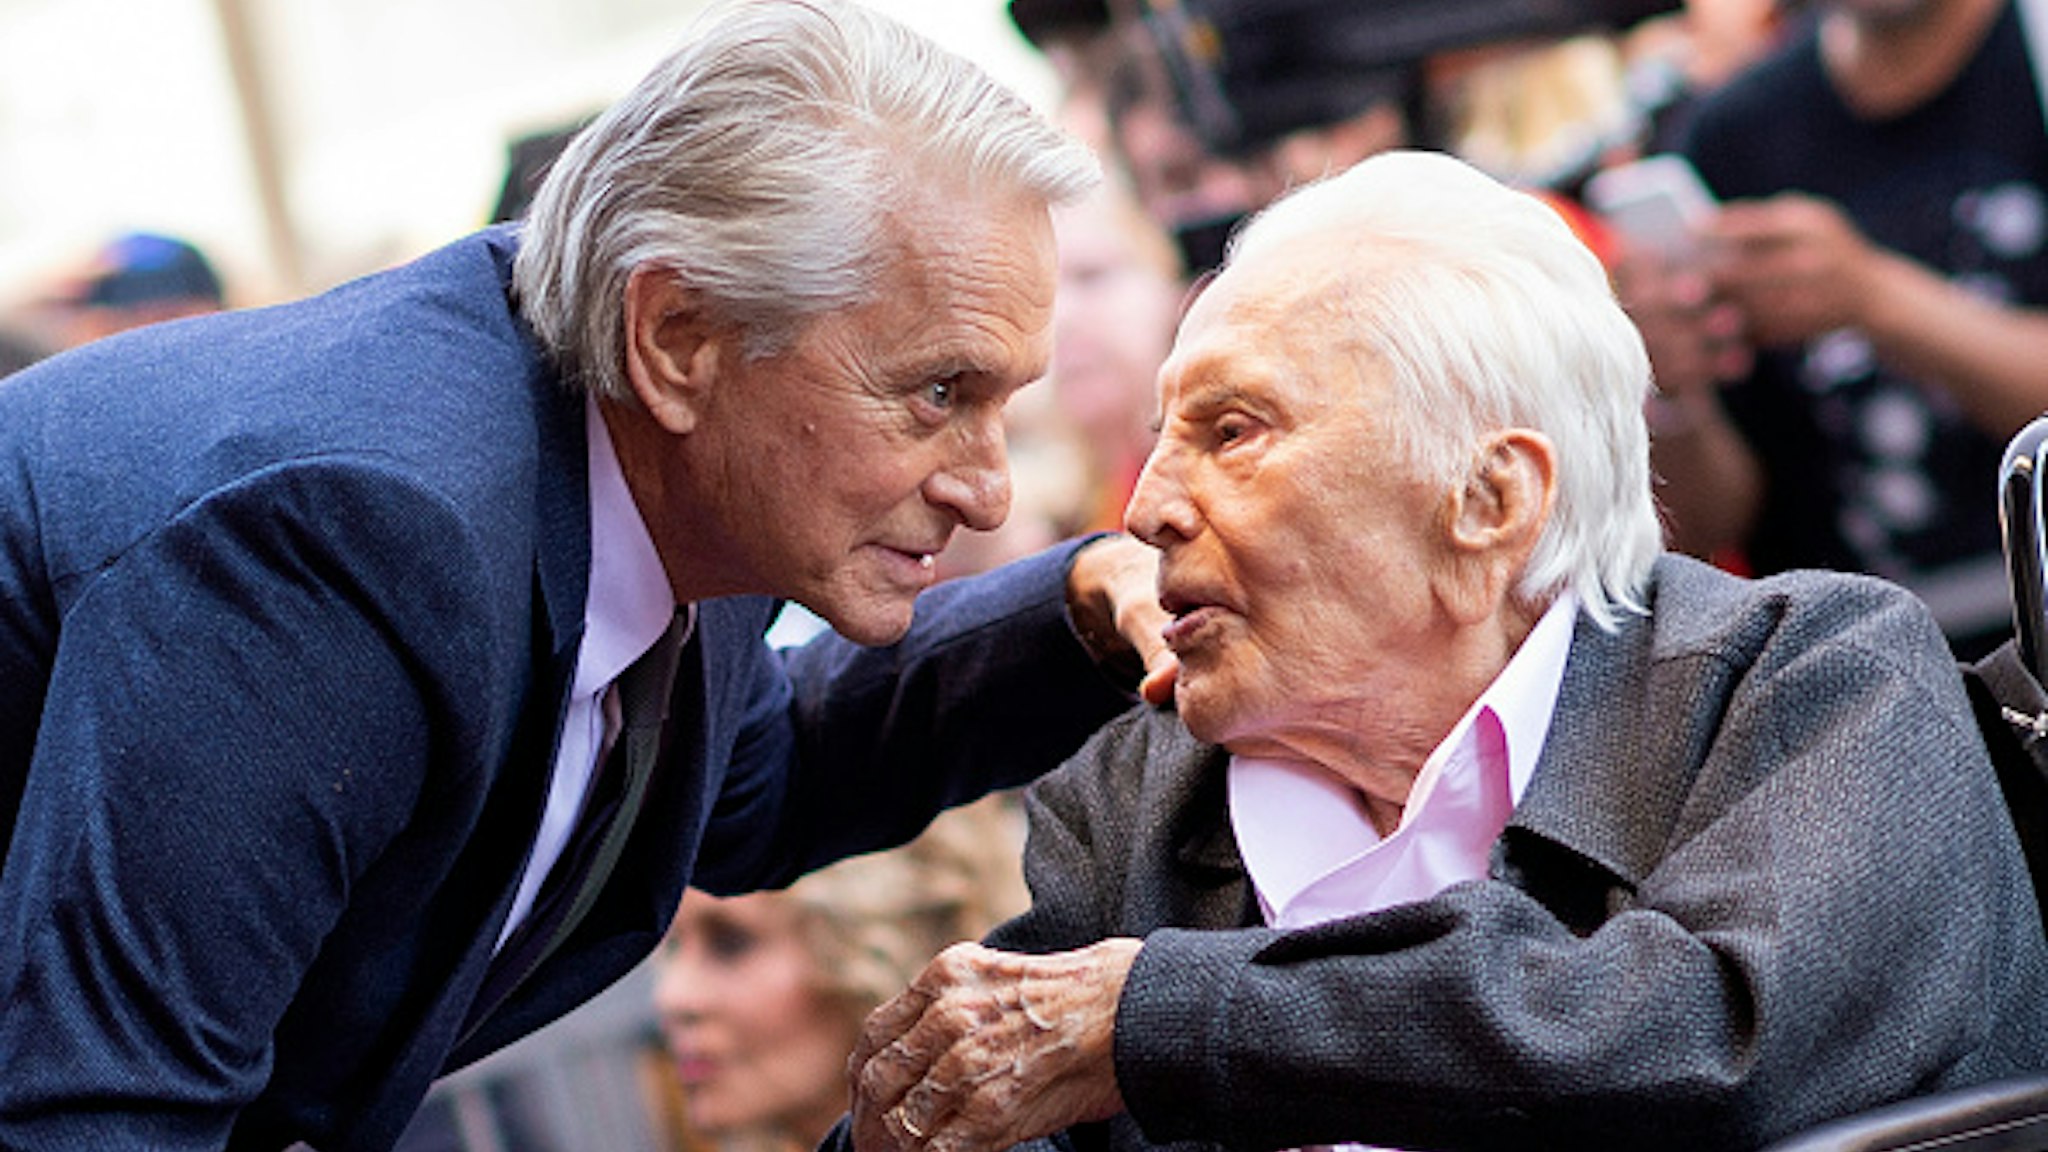 Actor Kirk Douglas (R) attends a ceremony honoring his son actor Michael Douglas (L) with a Star on Hollywood Walk of Fame, in Hollywood, California on November 6, 2018.